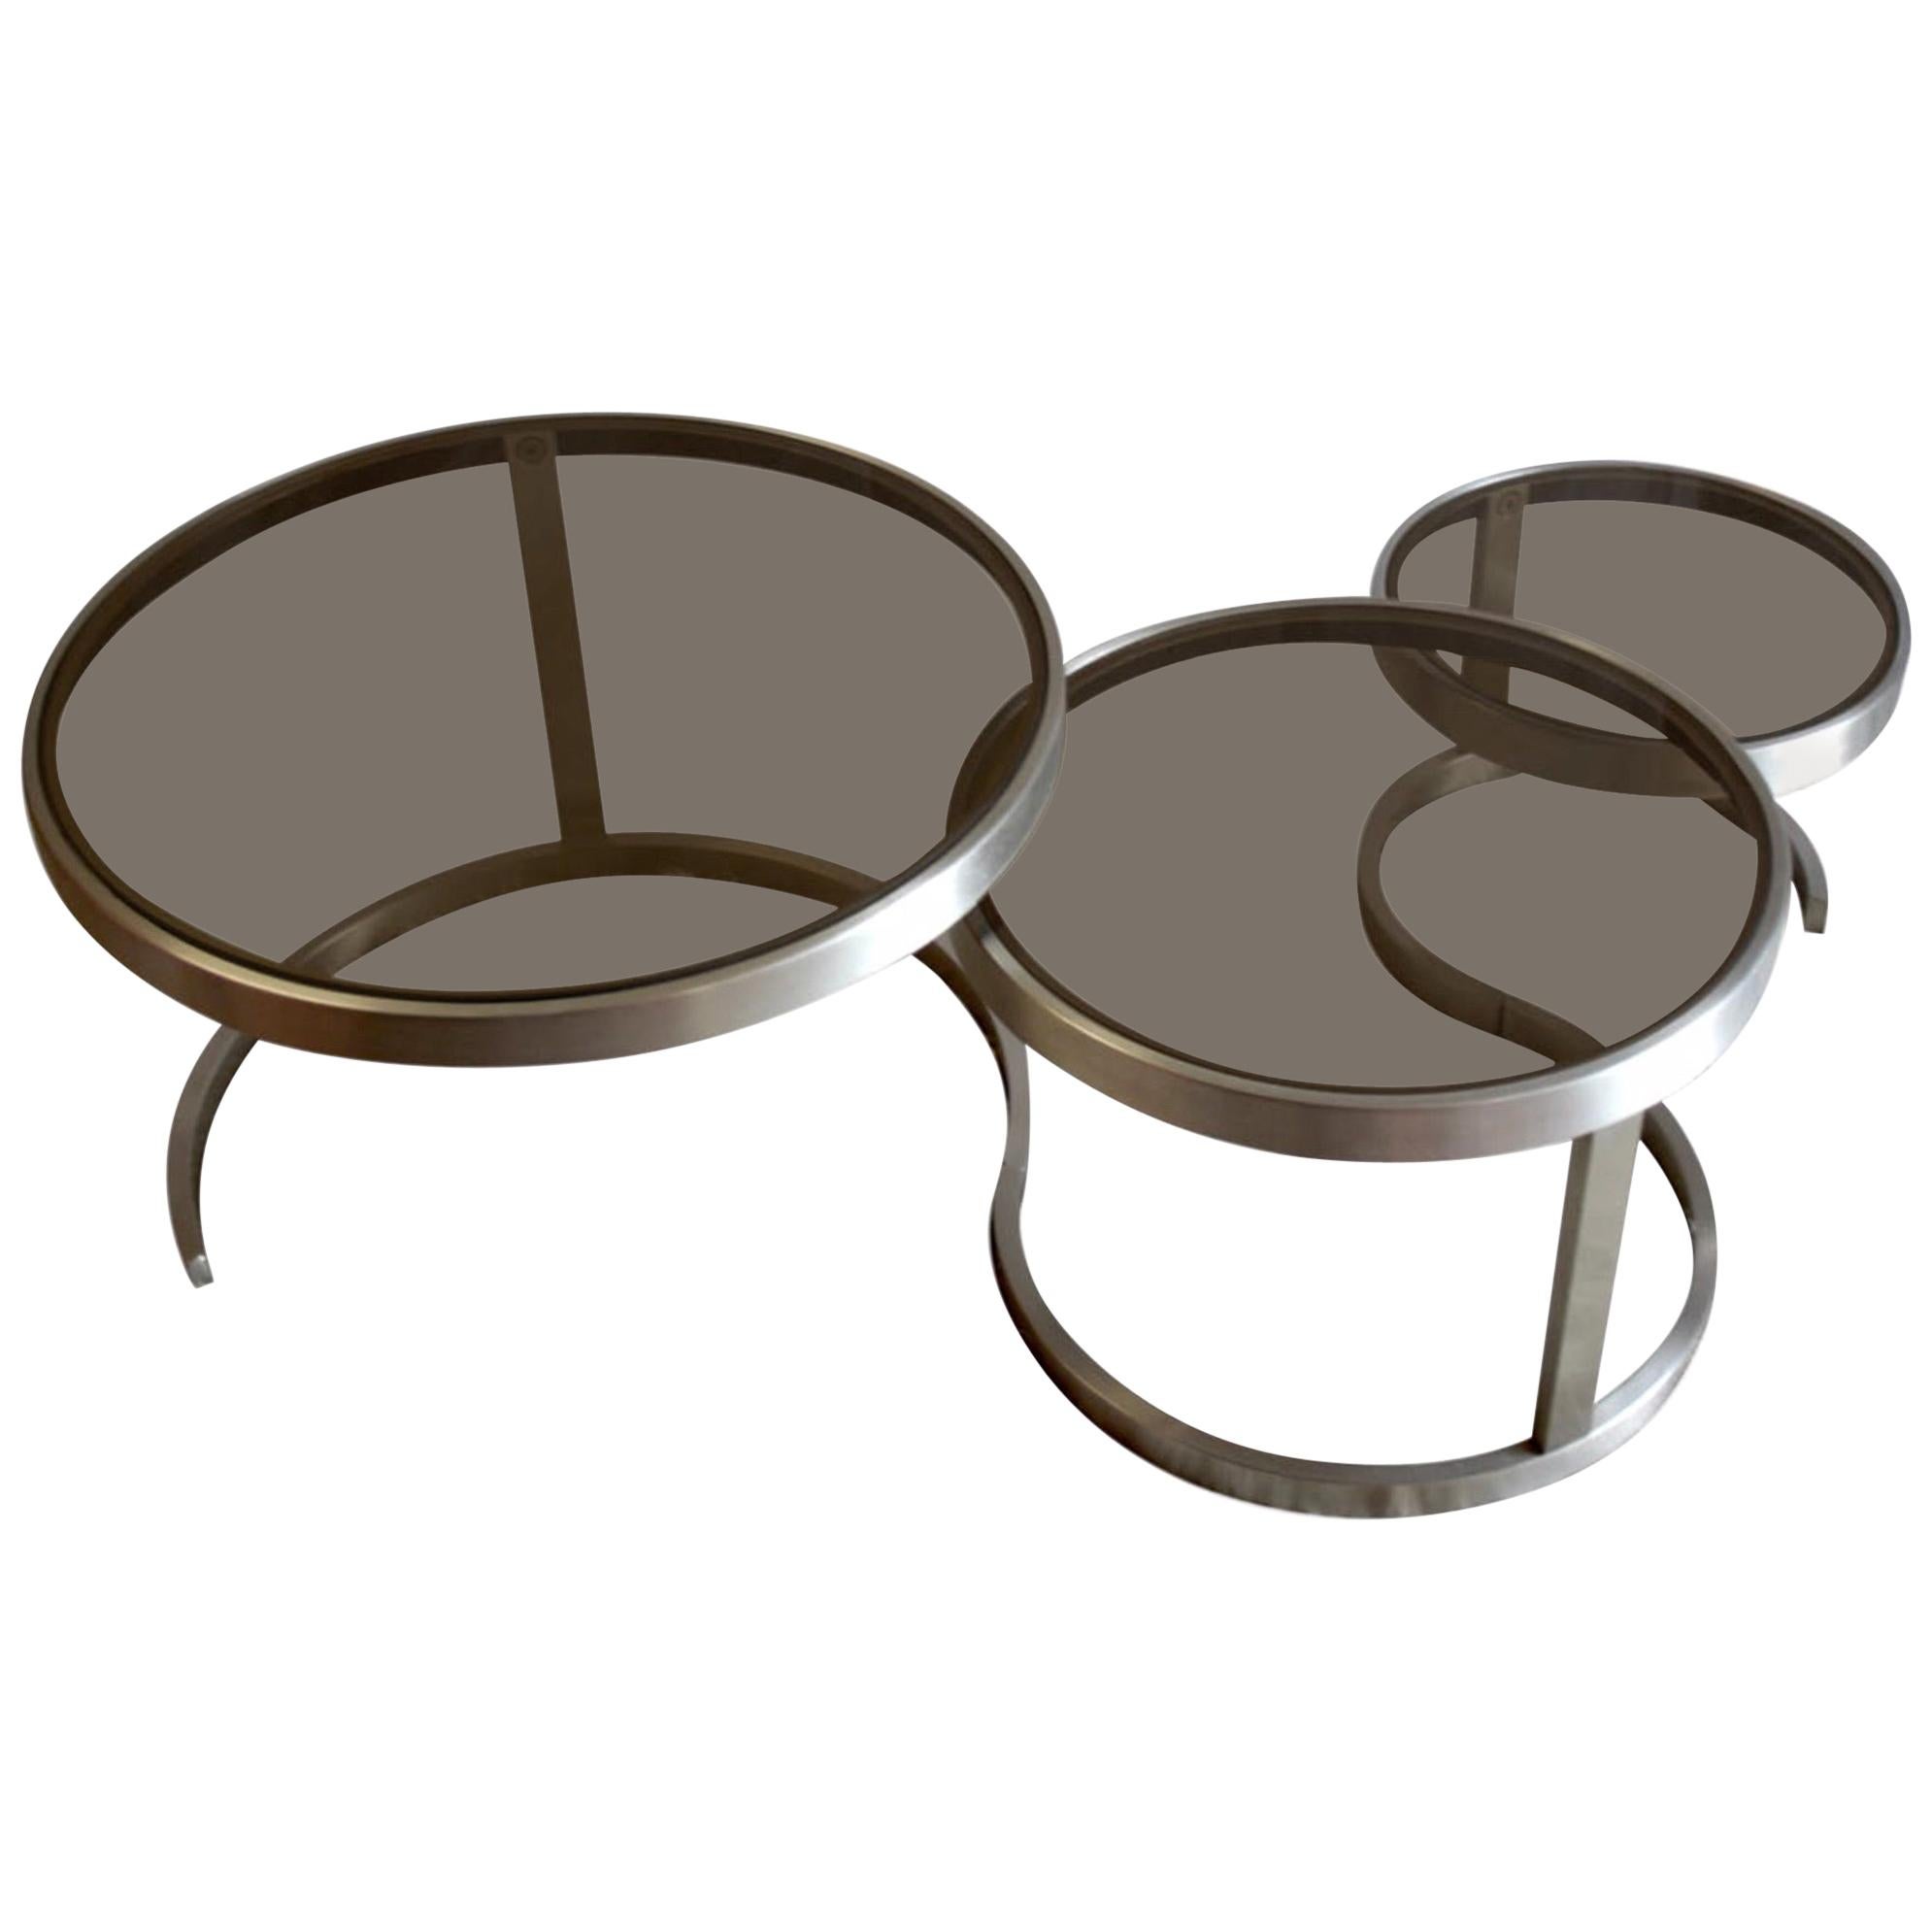 Gigognes Tables in Brushed Metal, 1970s